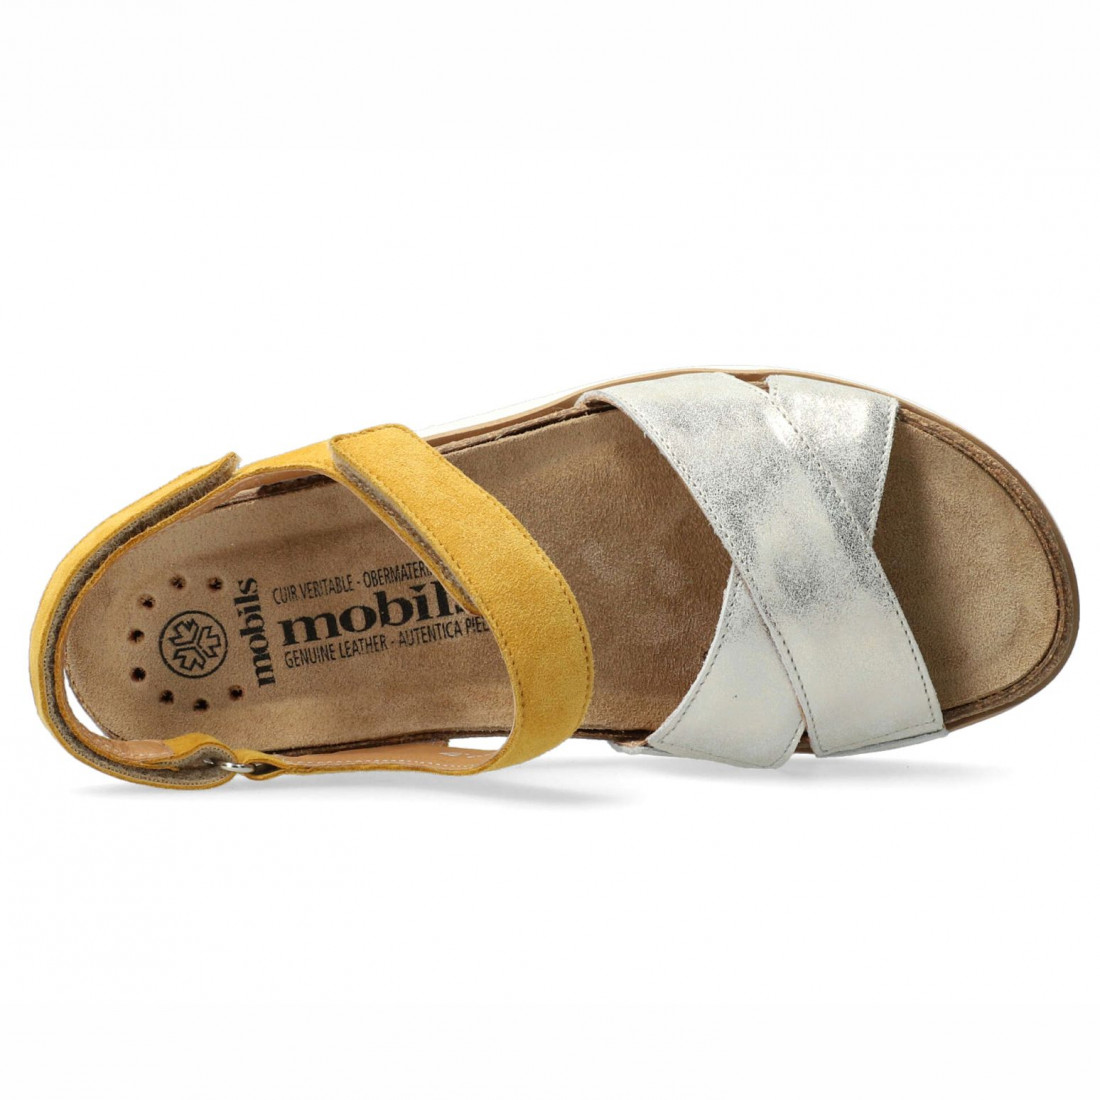 Women's Mephisto Mobils Tamia yellow and silver sandals